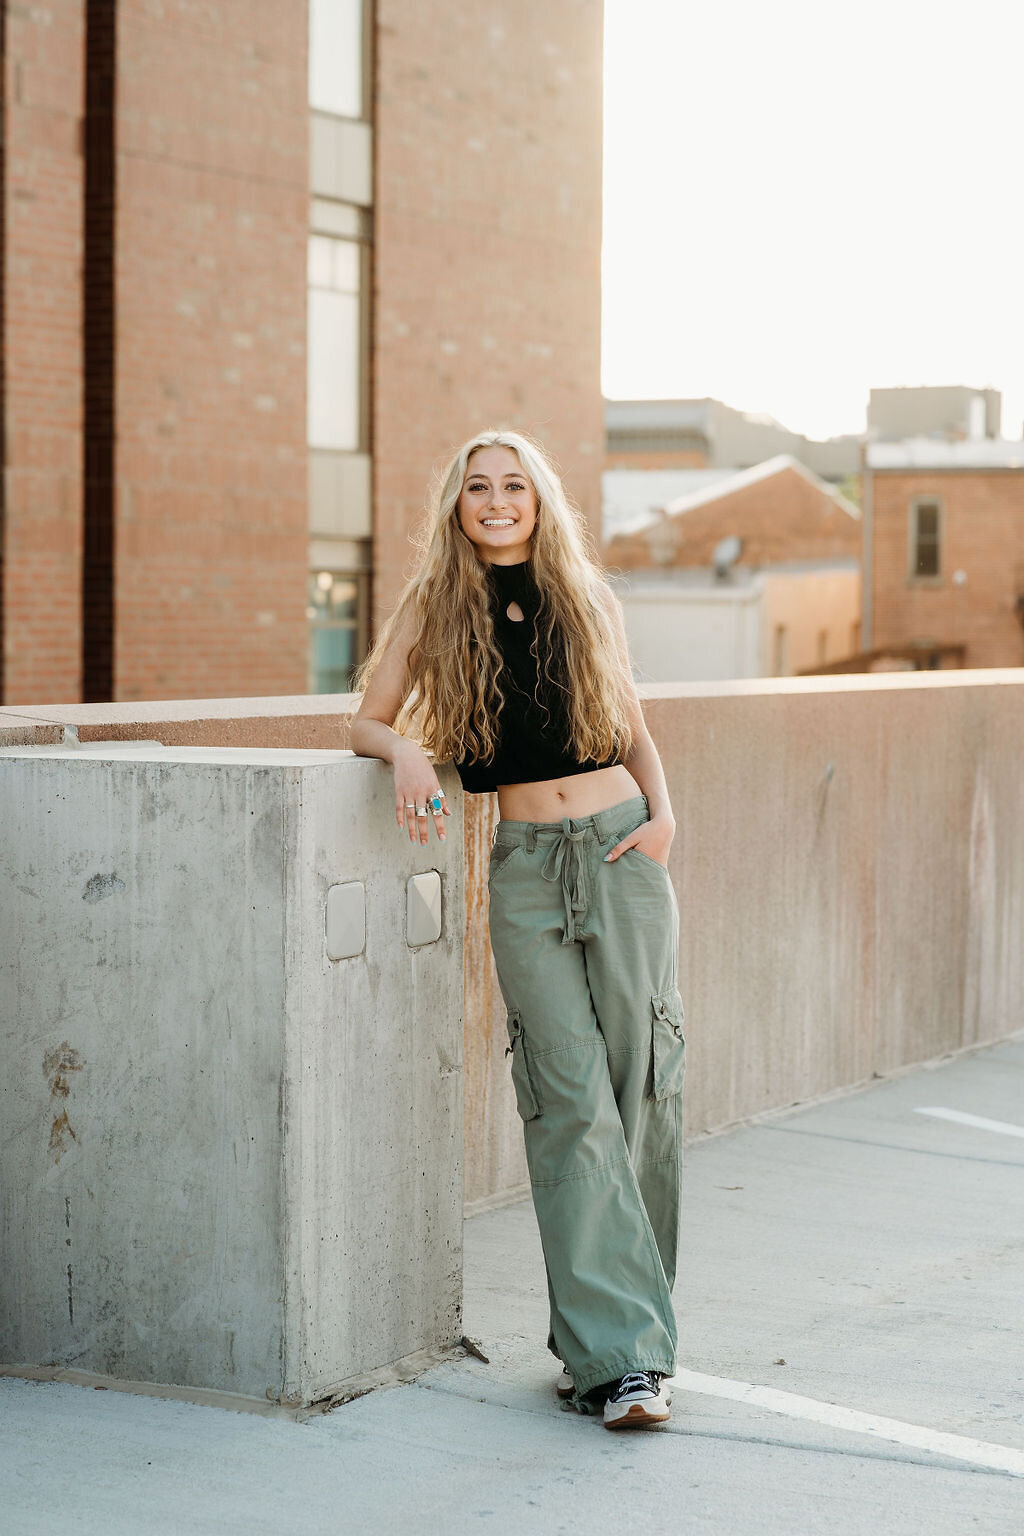 Old Town fort collins senior session